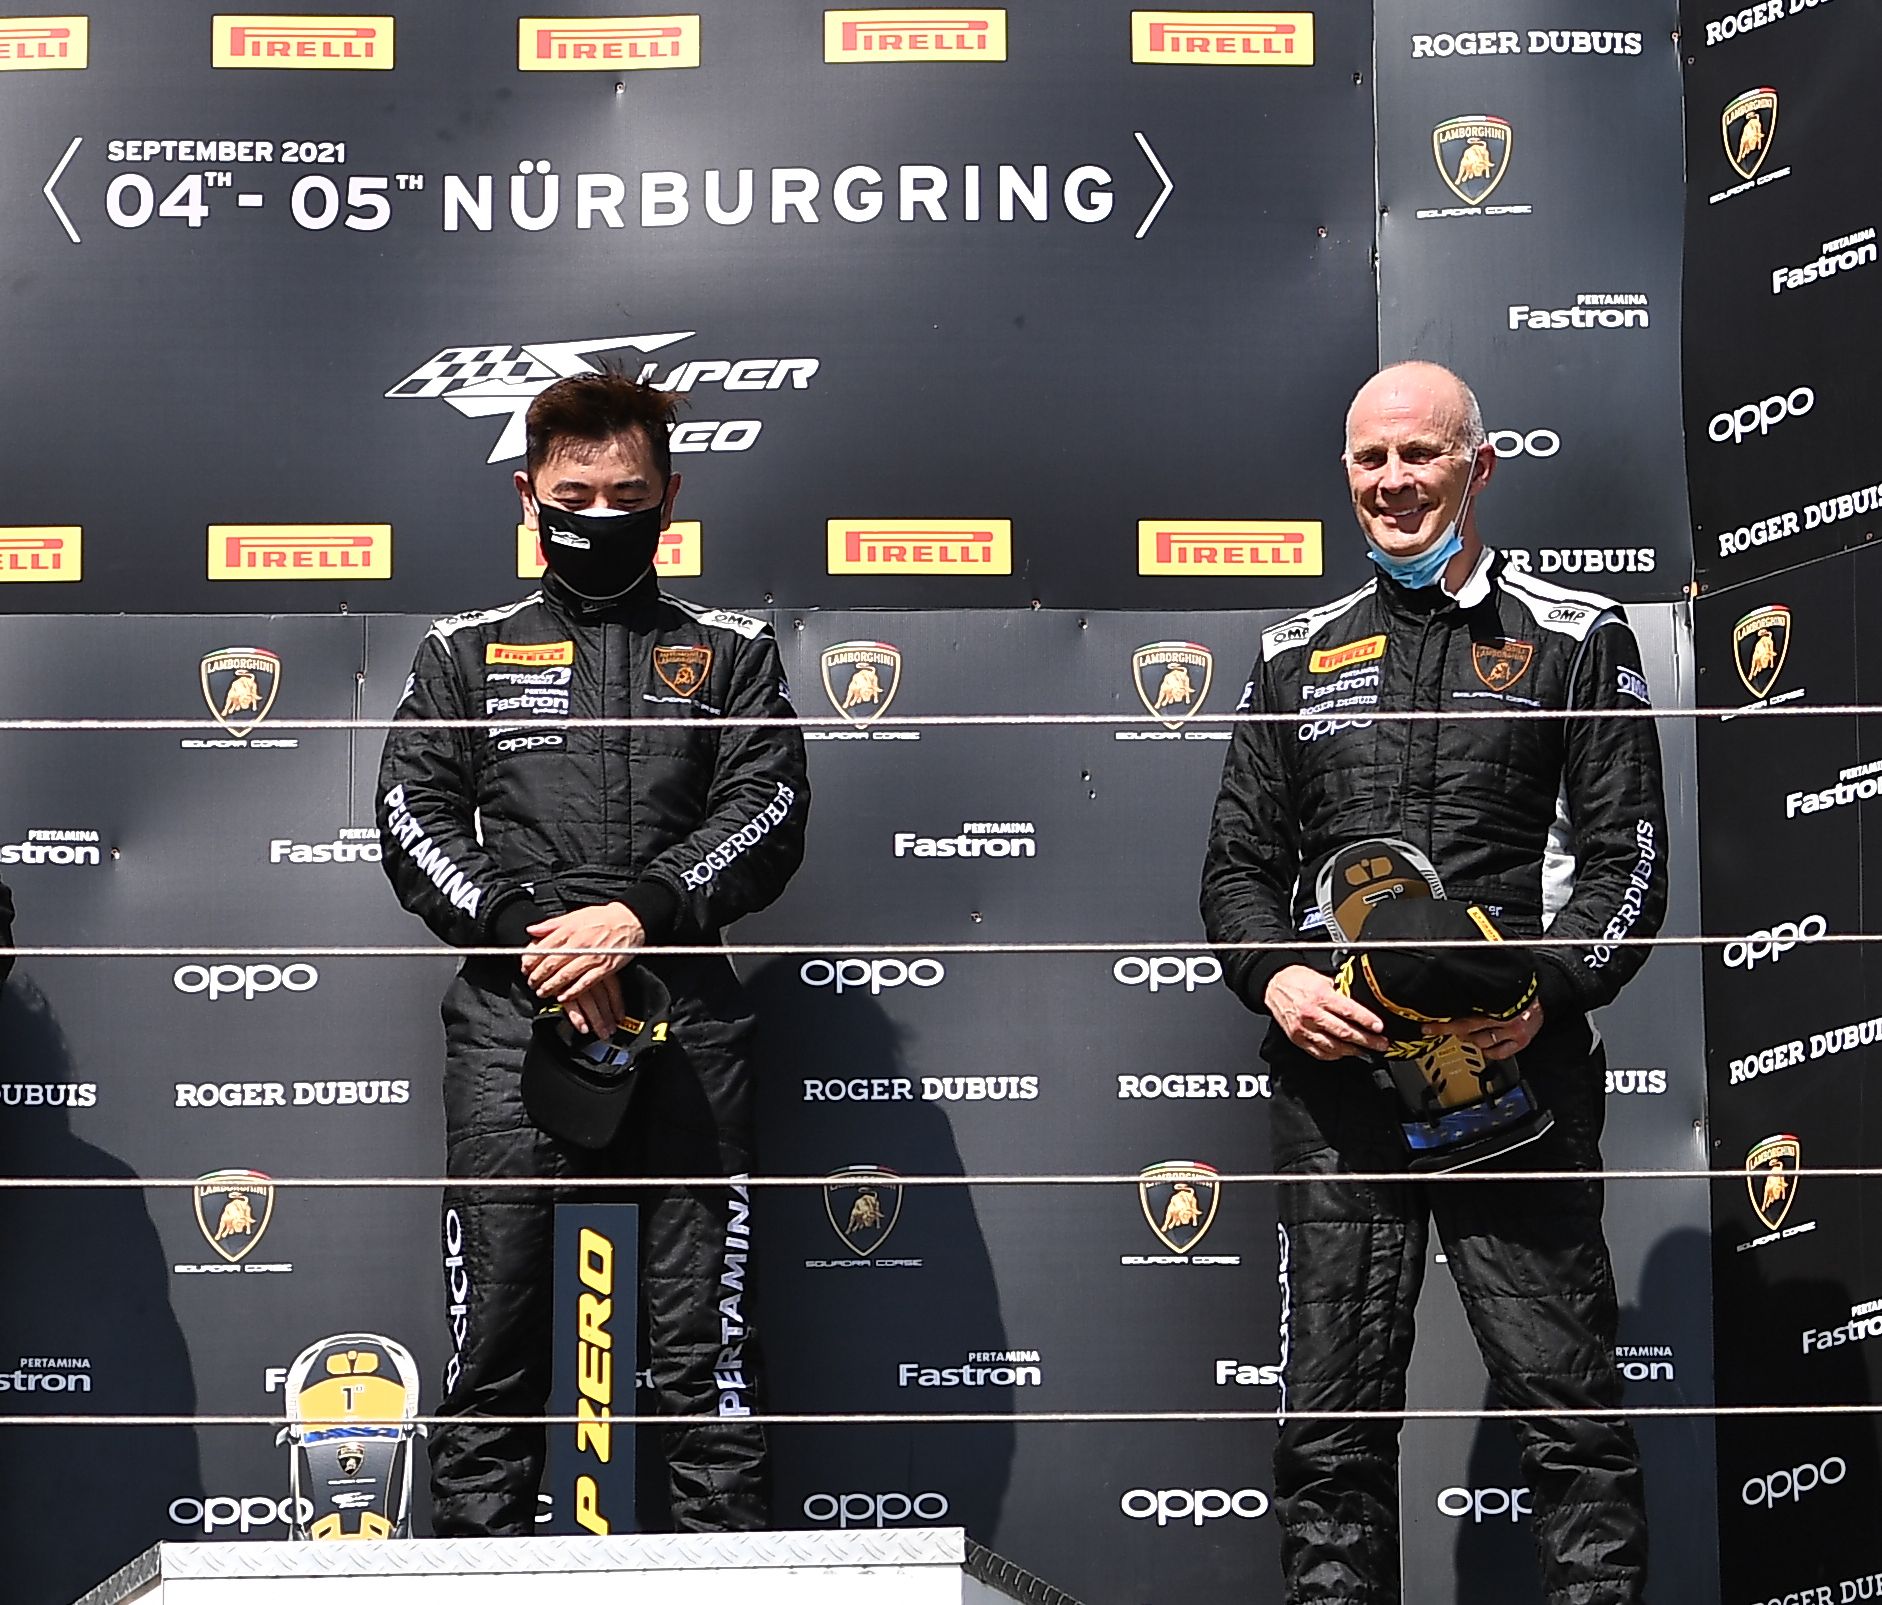 2021 Podium finish at the Nürburgring in Germany